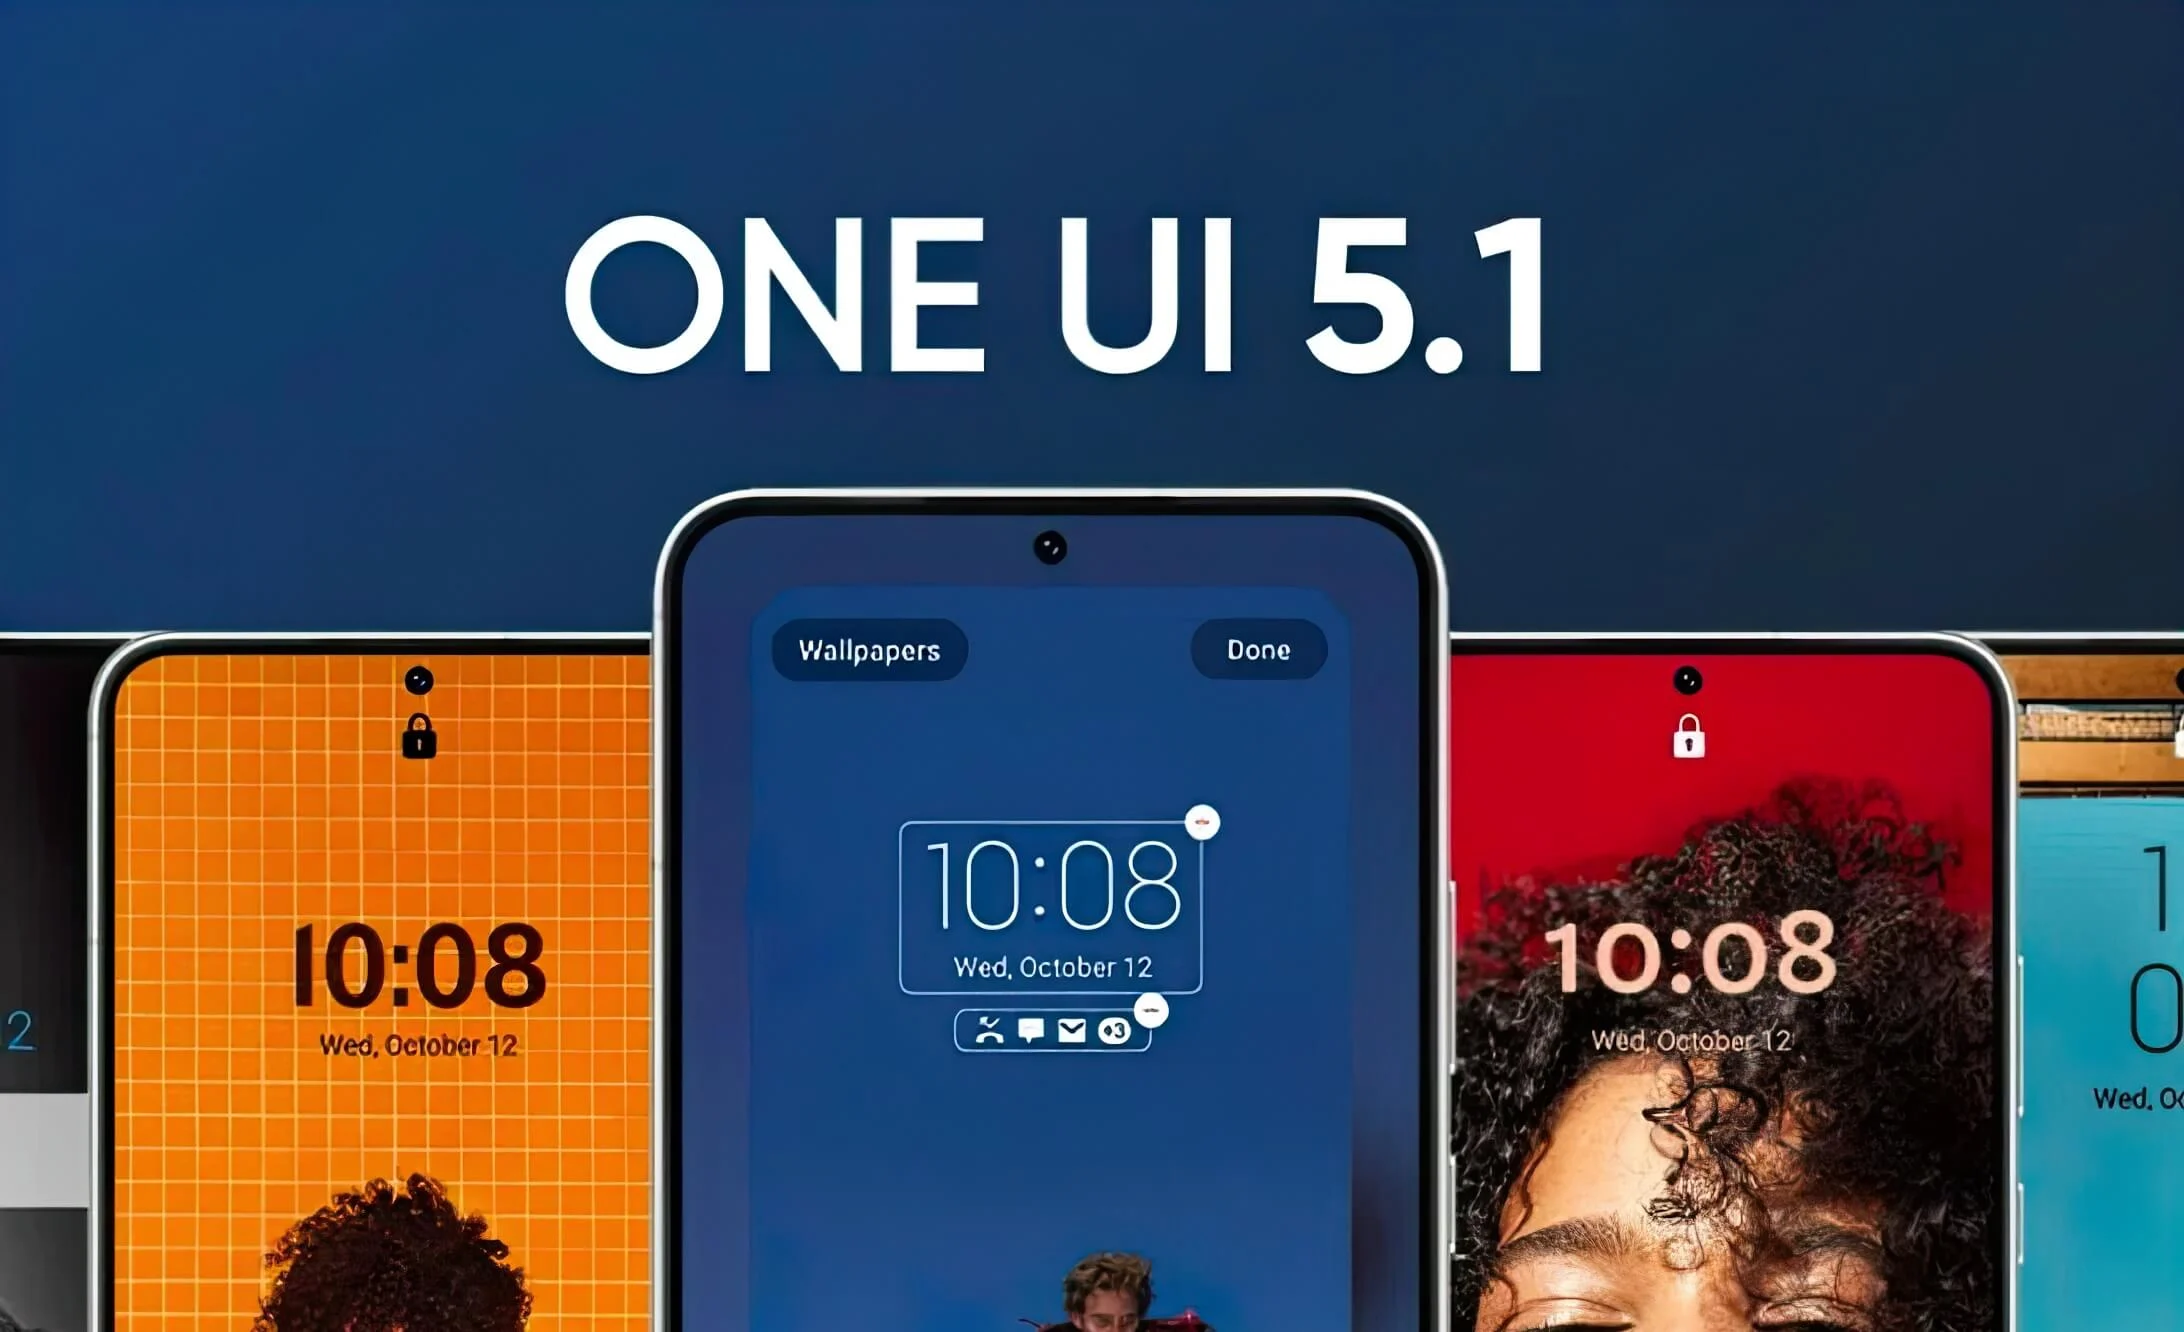 31 Samsung smartphones have already received stable One UI 5.1 firmware on Android 13